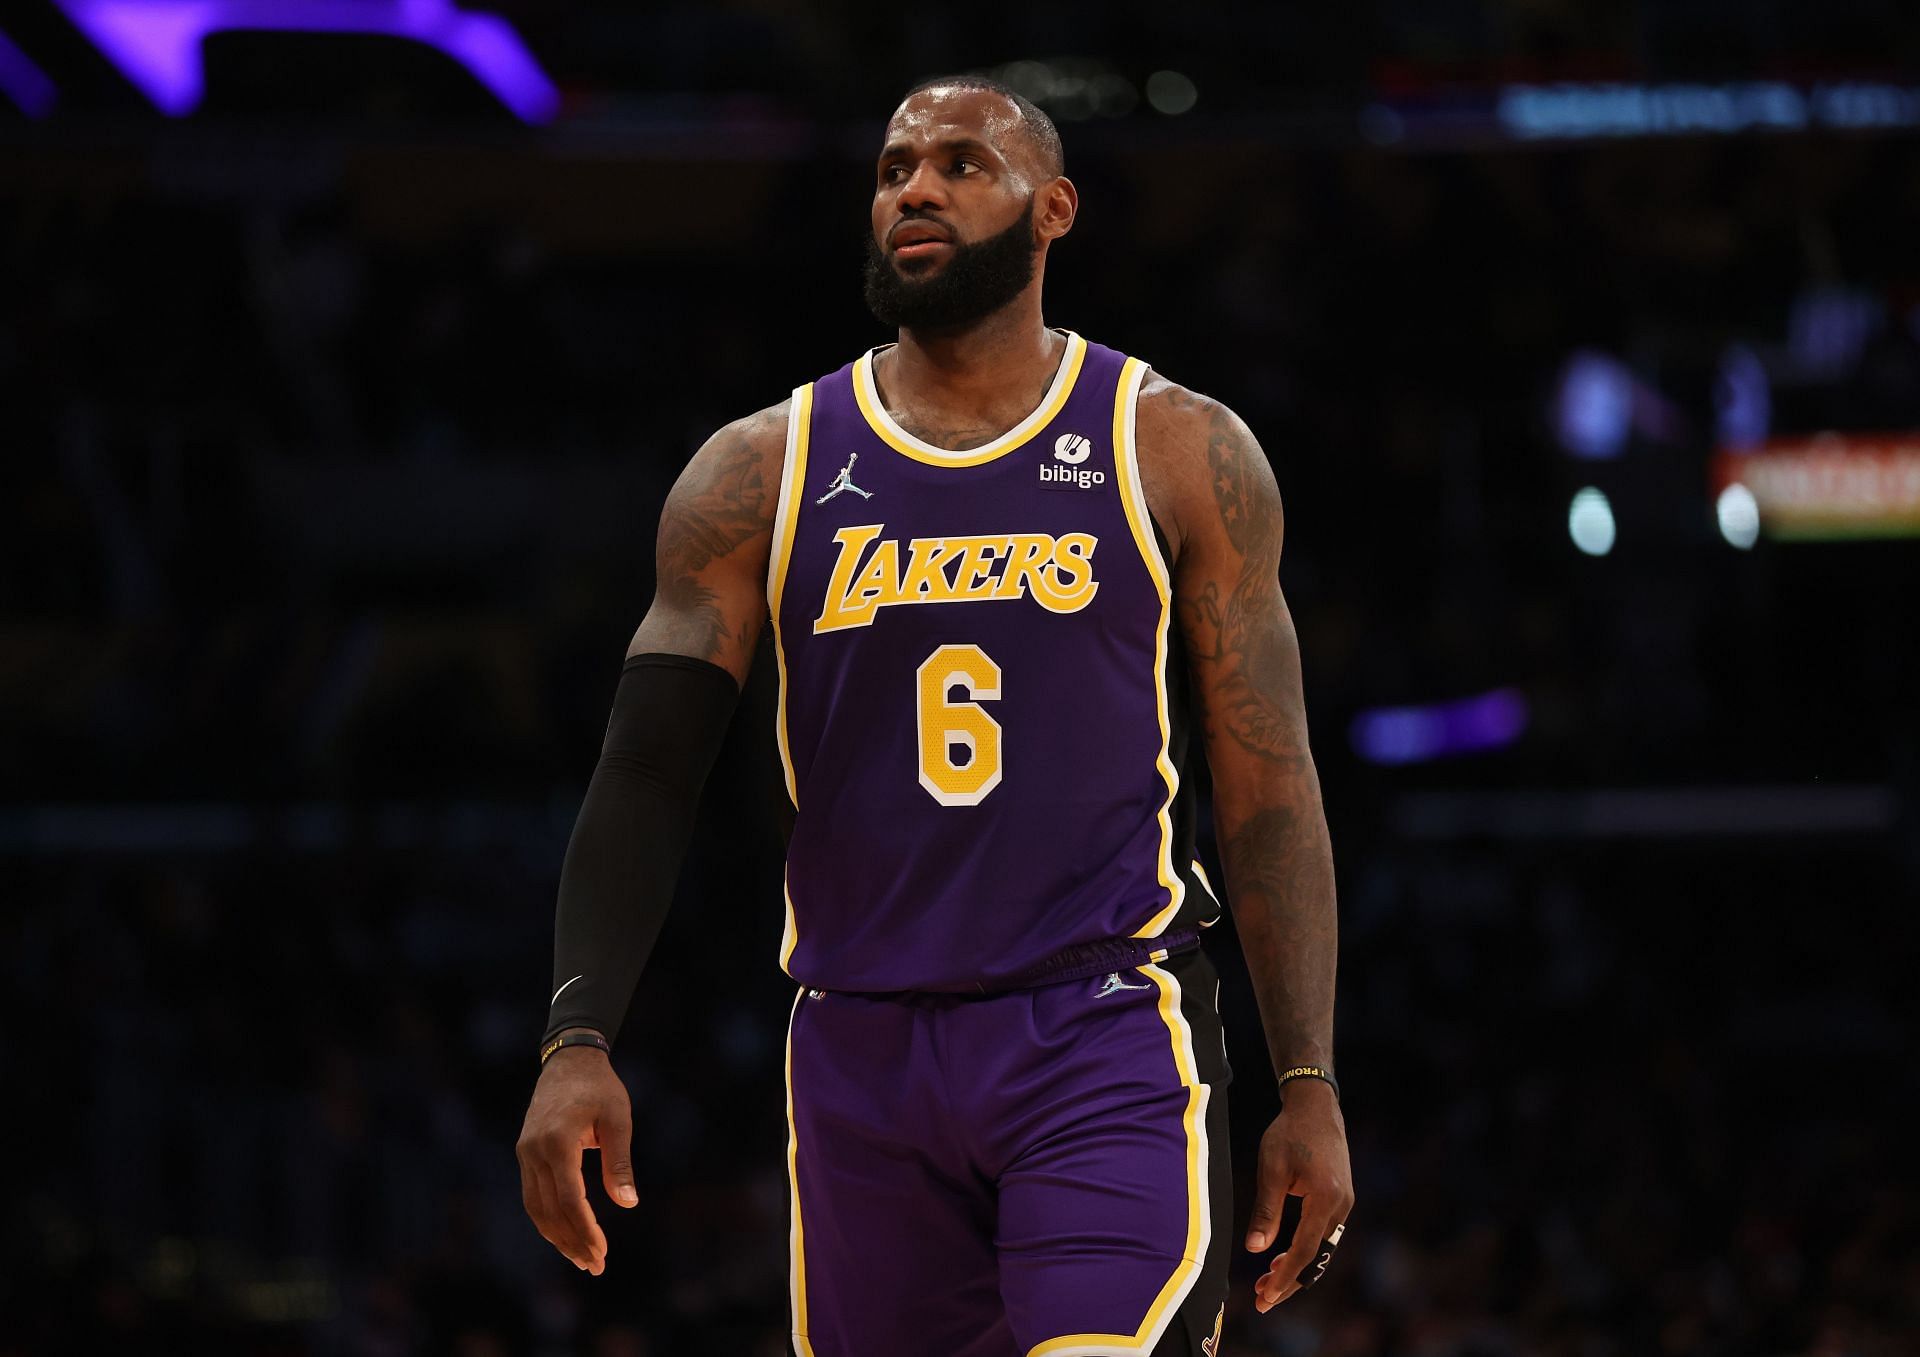 LeBron James in the fourth quarter at Staples Center on October 29, 2021 in Los Angeles